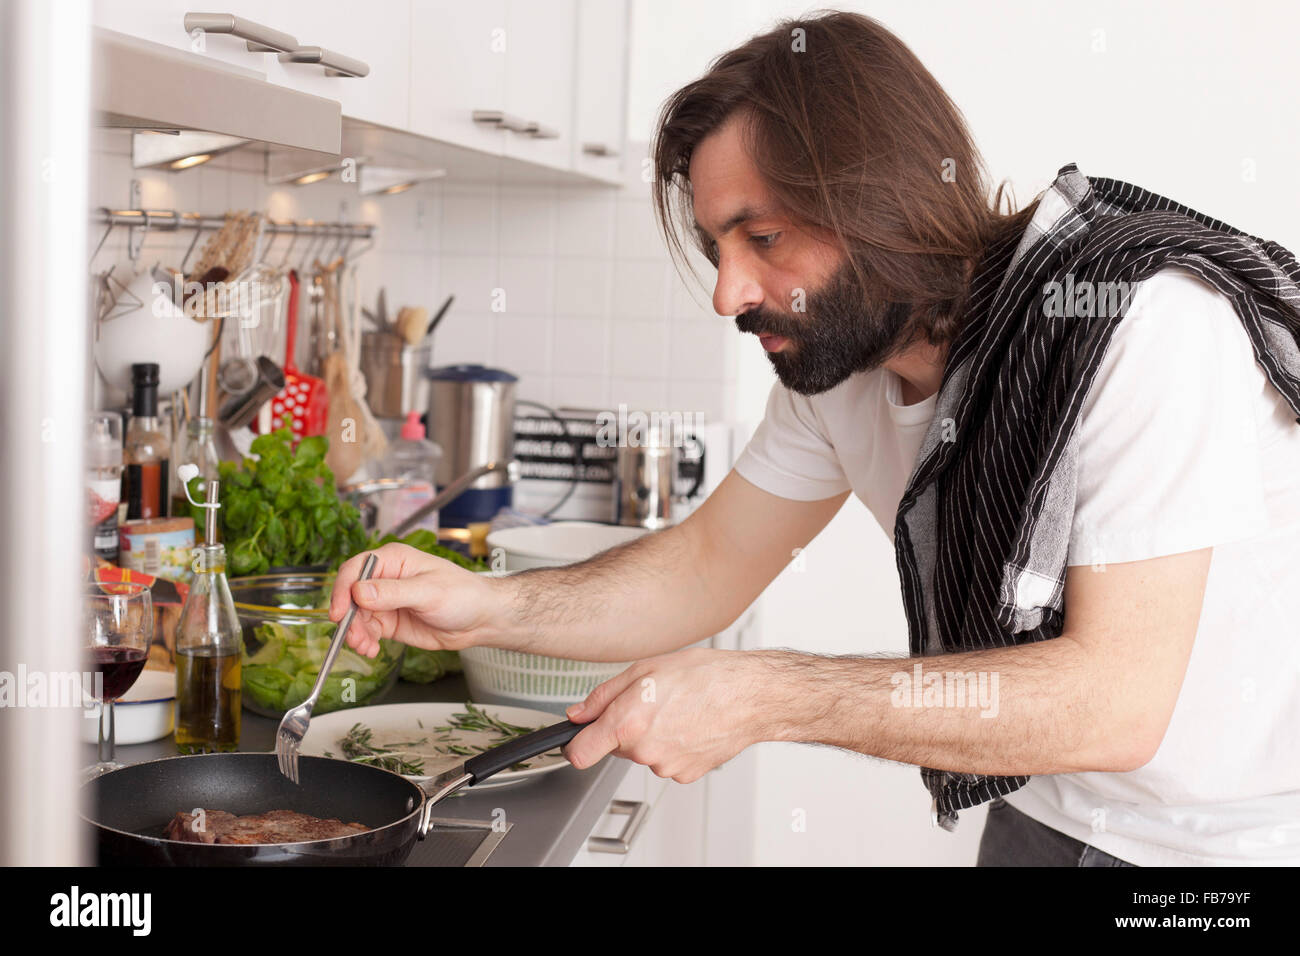 Mid adult man preparing meat in domestic kitchen Stock Photo